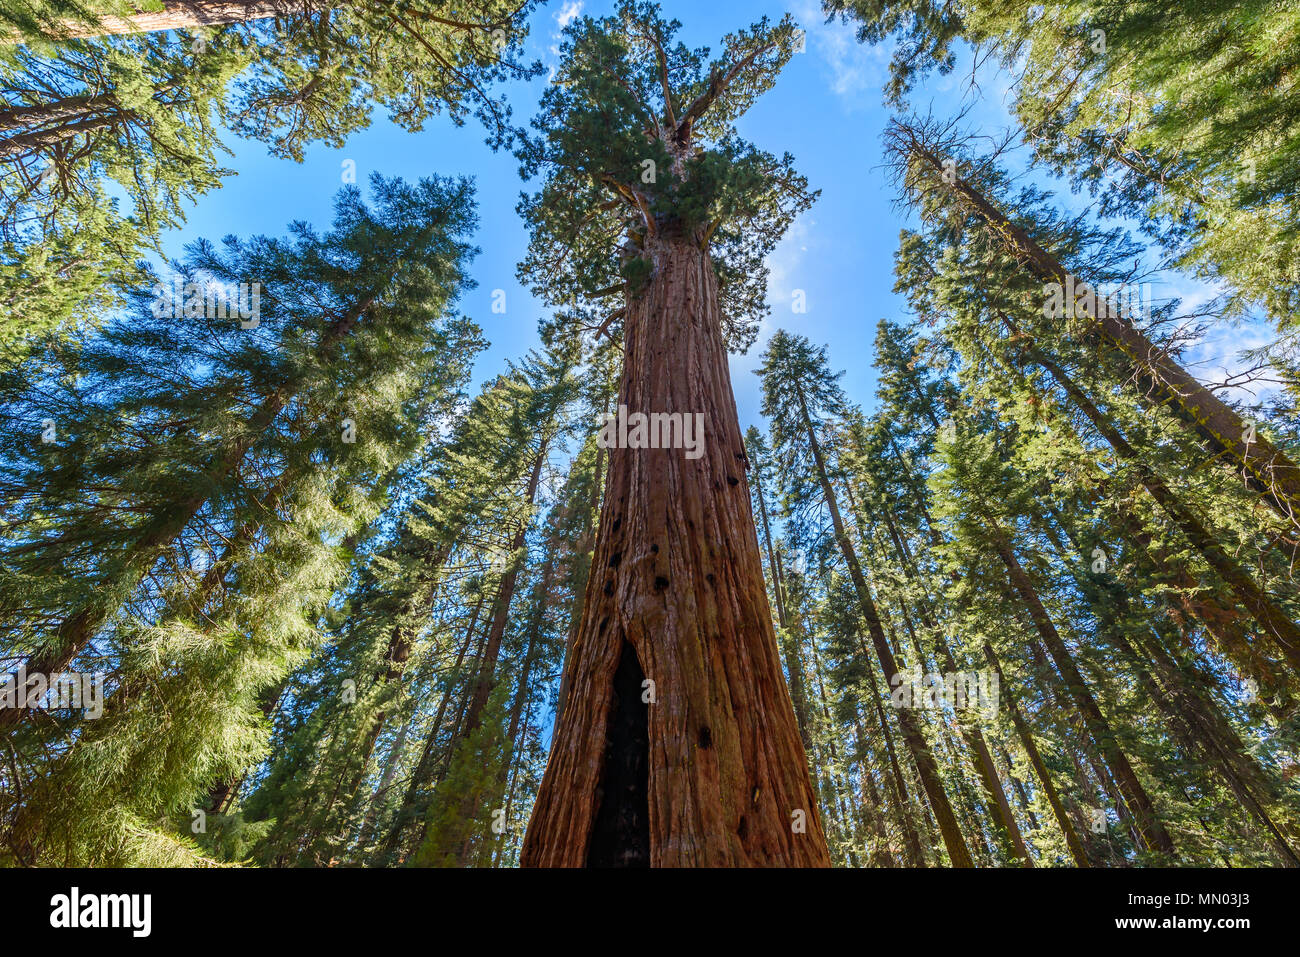 General Sherman Tree - the largest tree on Earth, Giant Sequoia Trees in Sequoia National Park, California, USA Stock Photo